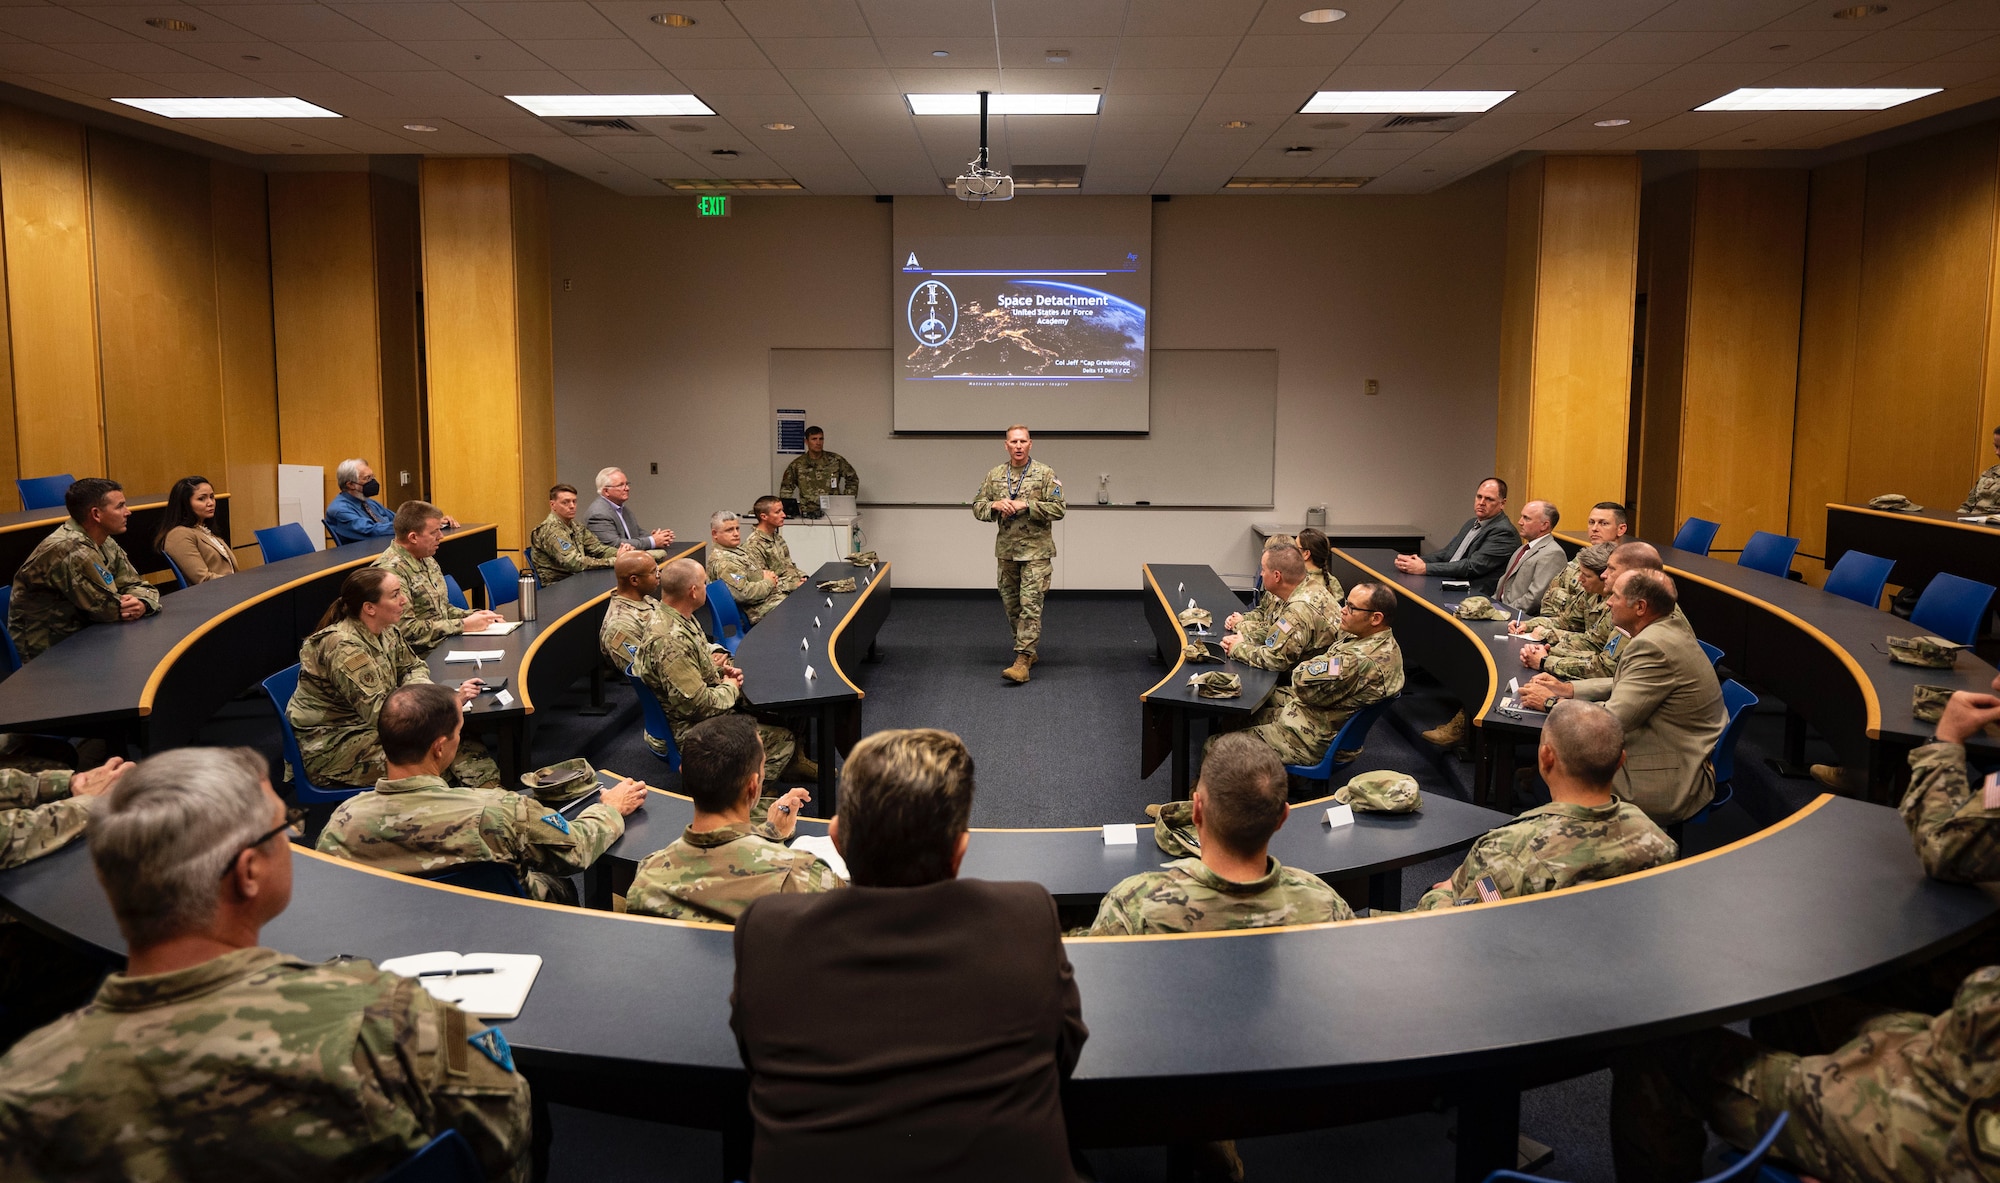 Space Training and Readiness Command senior leaders receive a briefing from Col. Jeffrey Greenwood, Space Delta 13 Detachment 1 commander, during a conference at the U.S. Air Force Academy